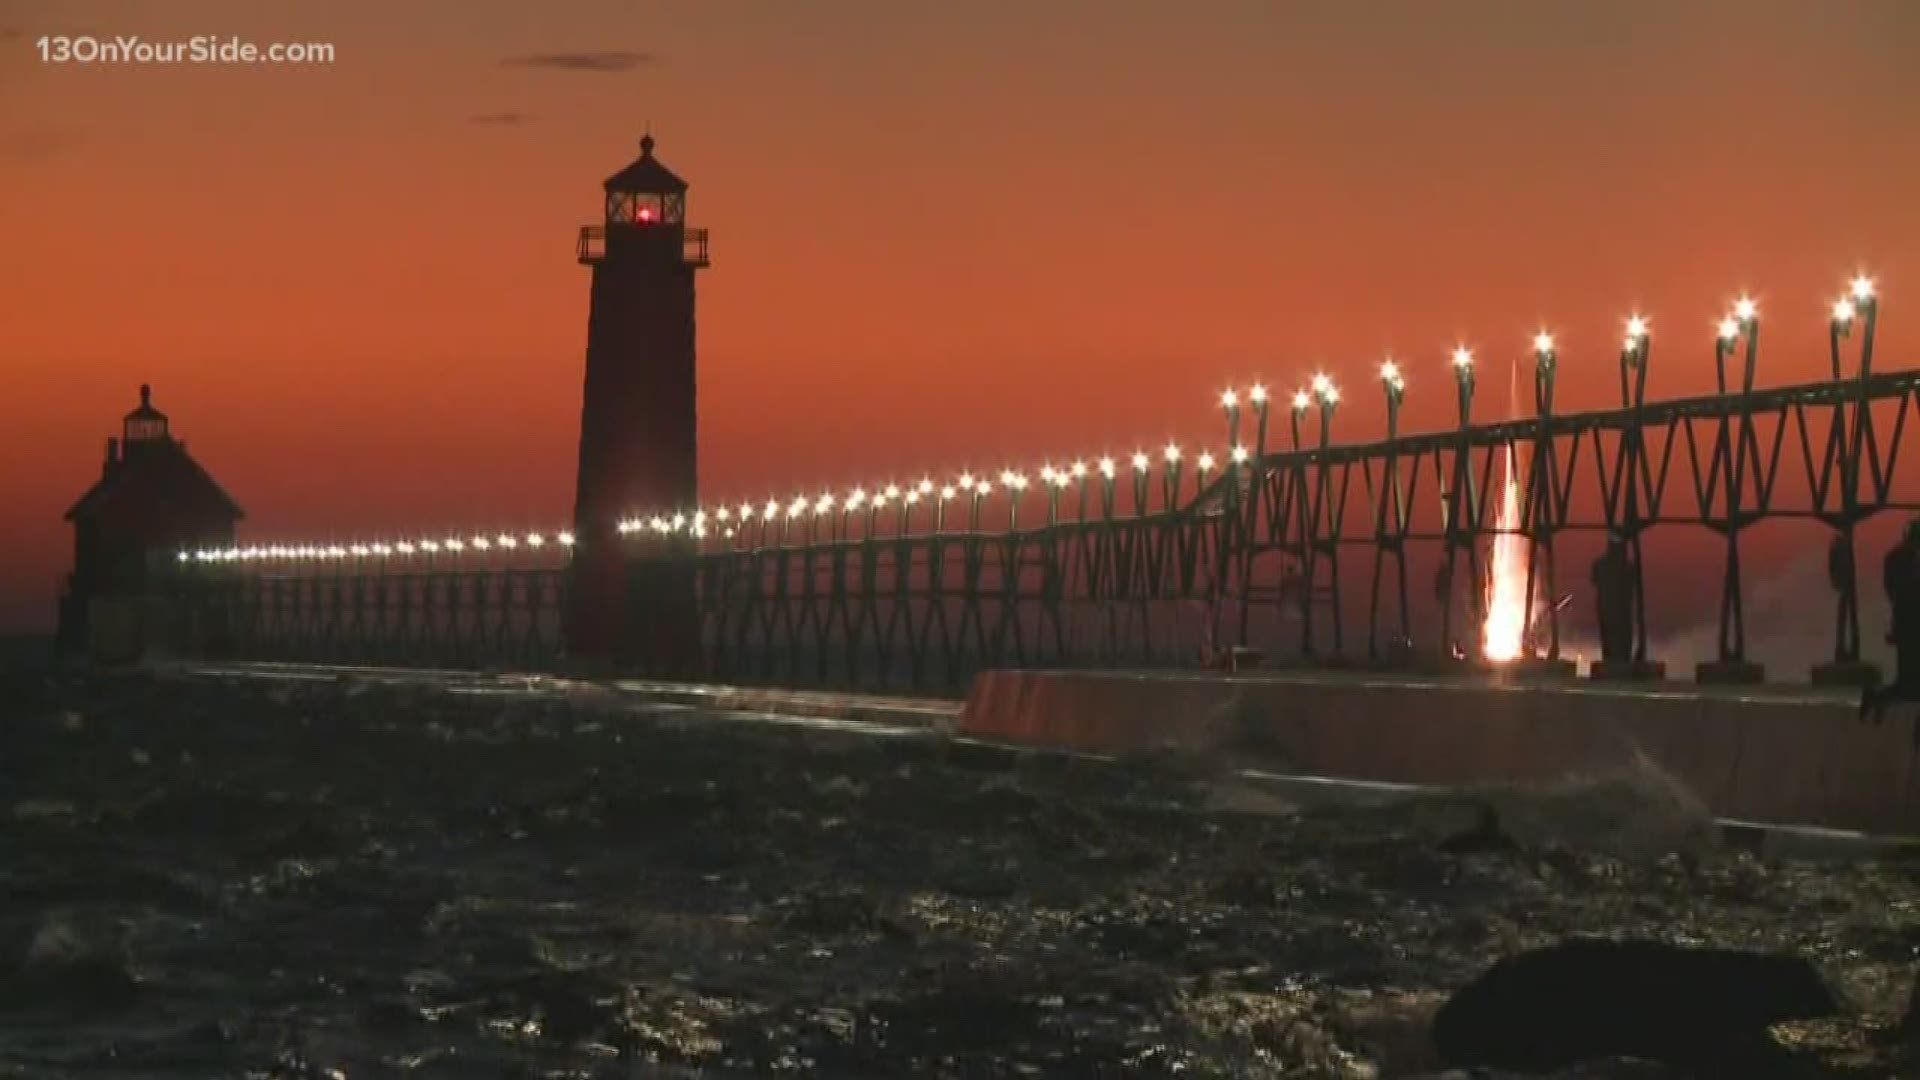 The Grand Haven catwalk was illuminated for the first time in 3 years. Monday night, the community came out to celebrate.